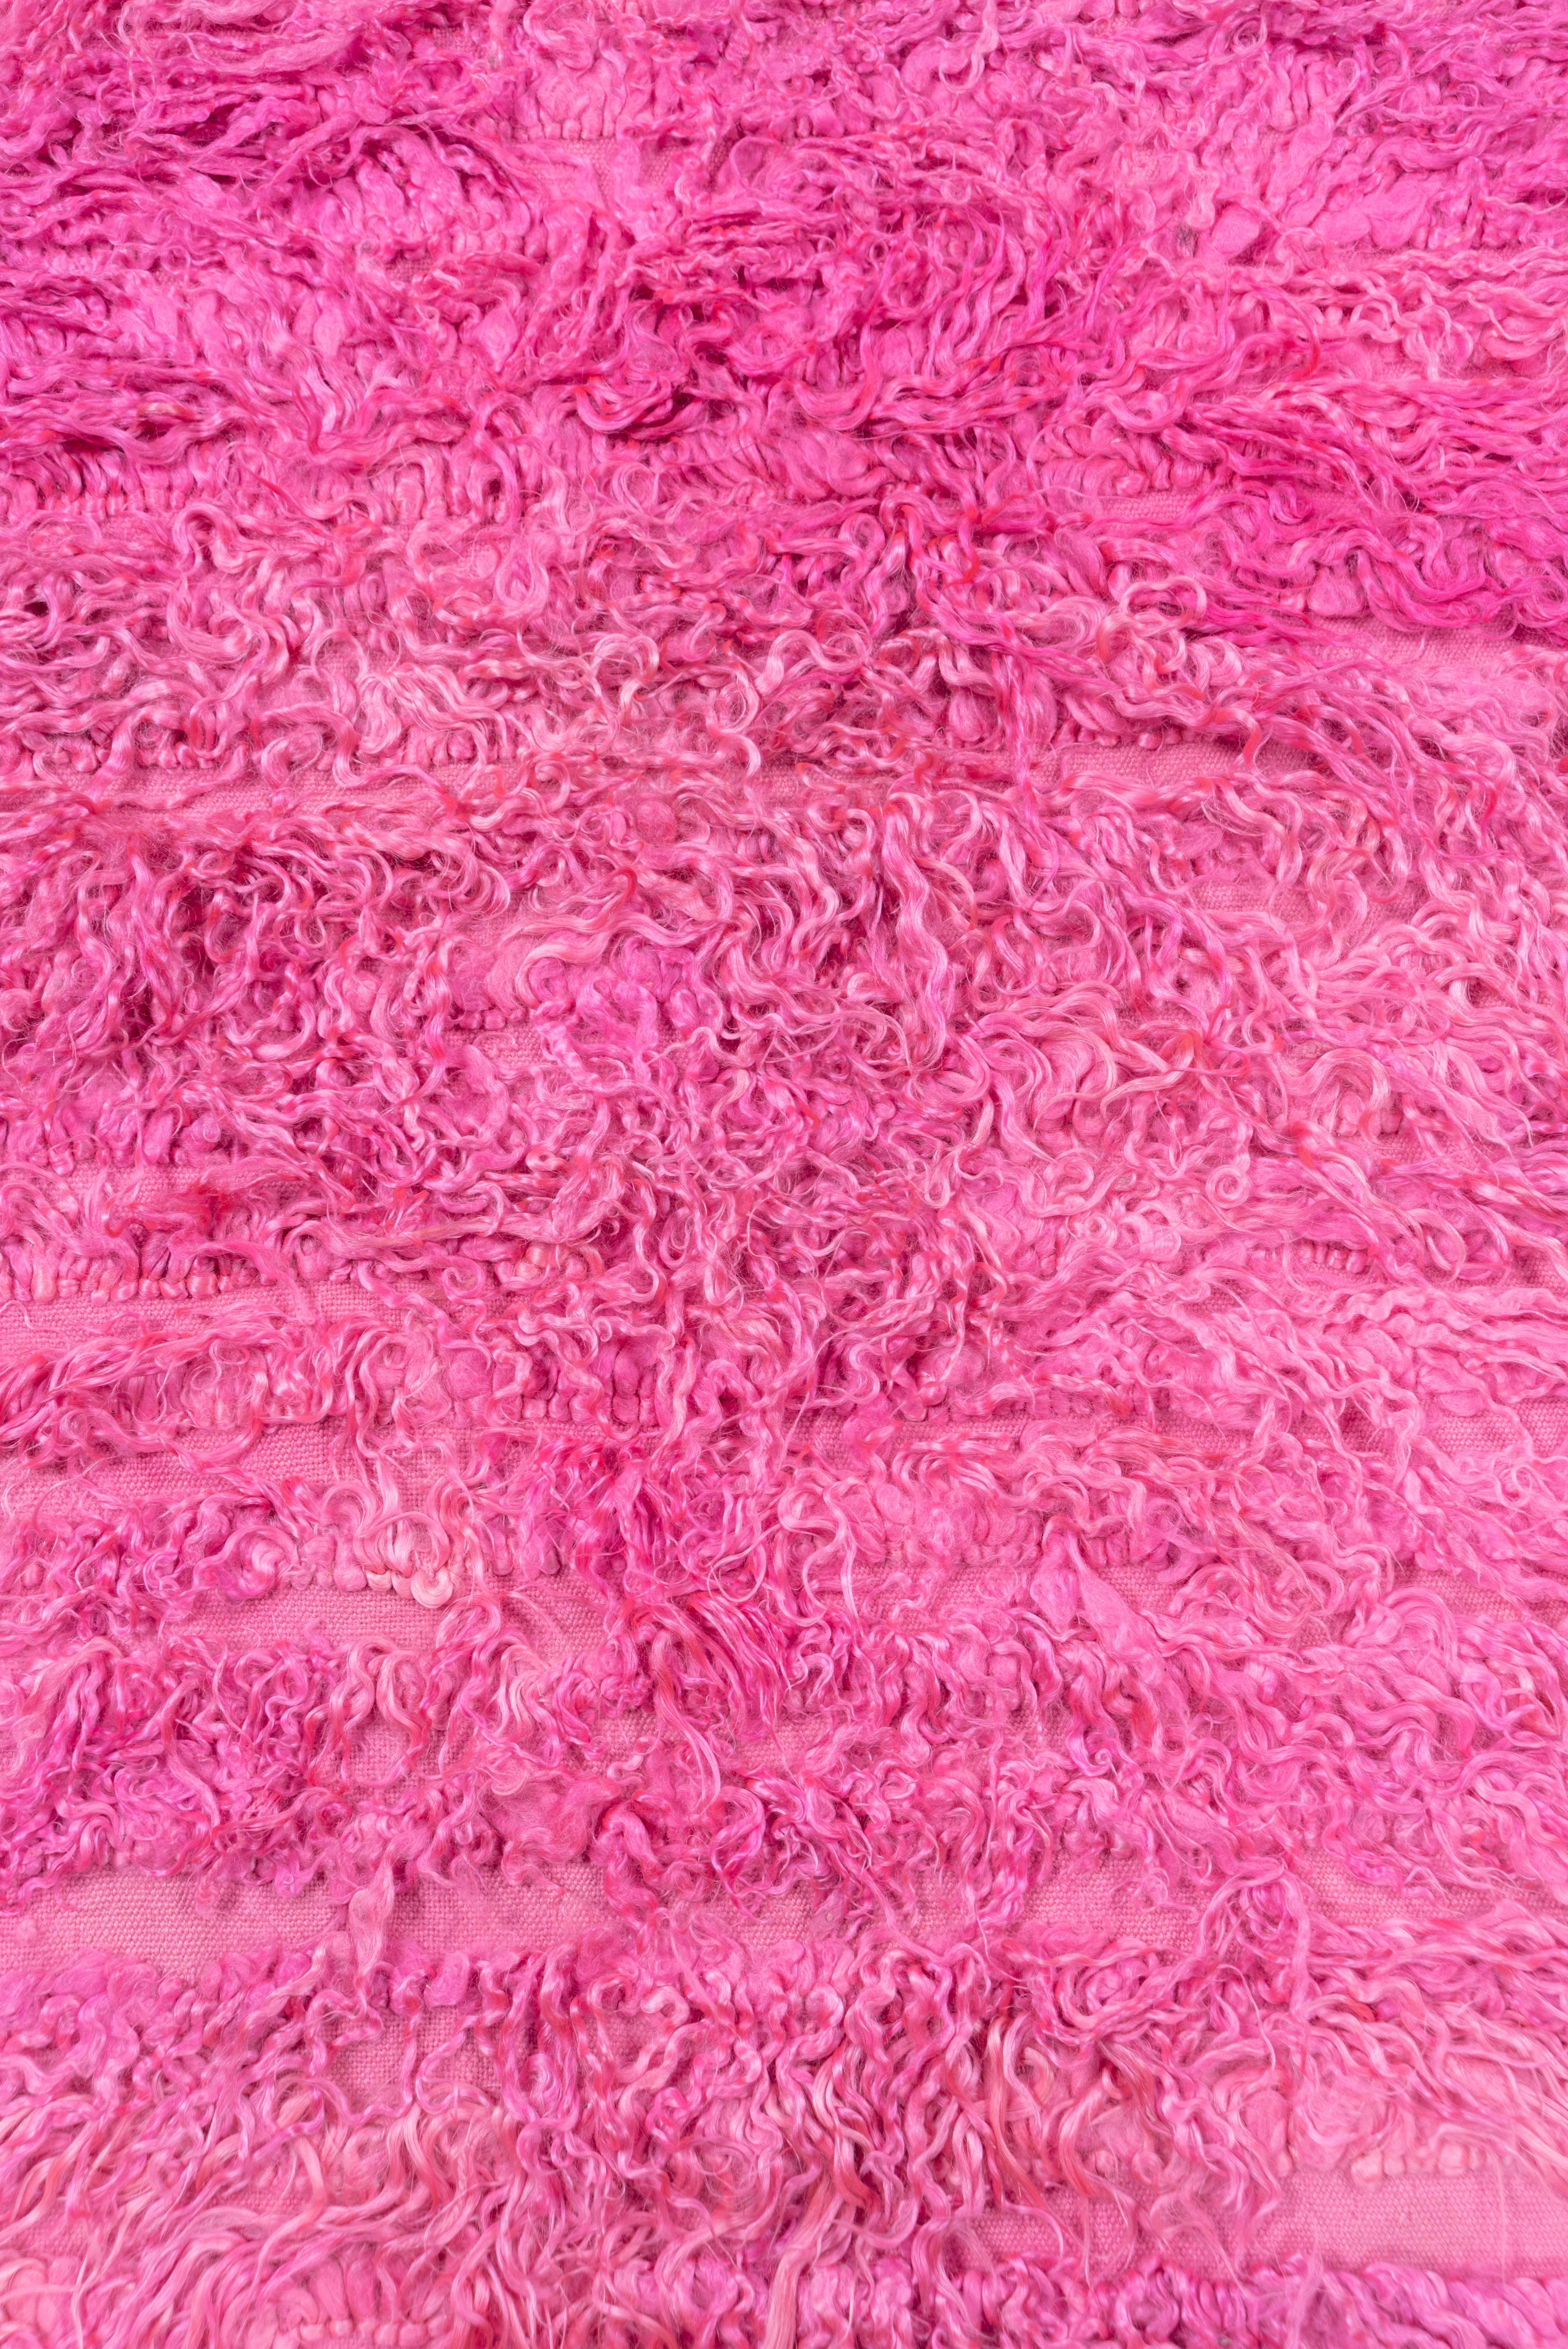 This central Anatolian village Tulu is totally pink, both in the long shaggy pile and in the multi-wefted foundation. Abrash, but no borders or pattern.